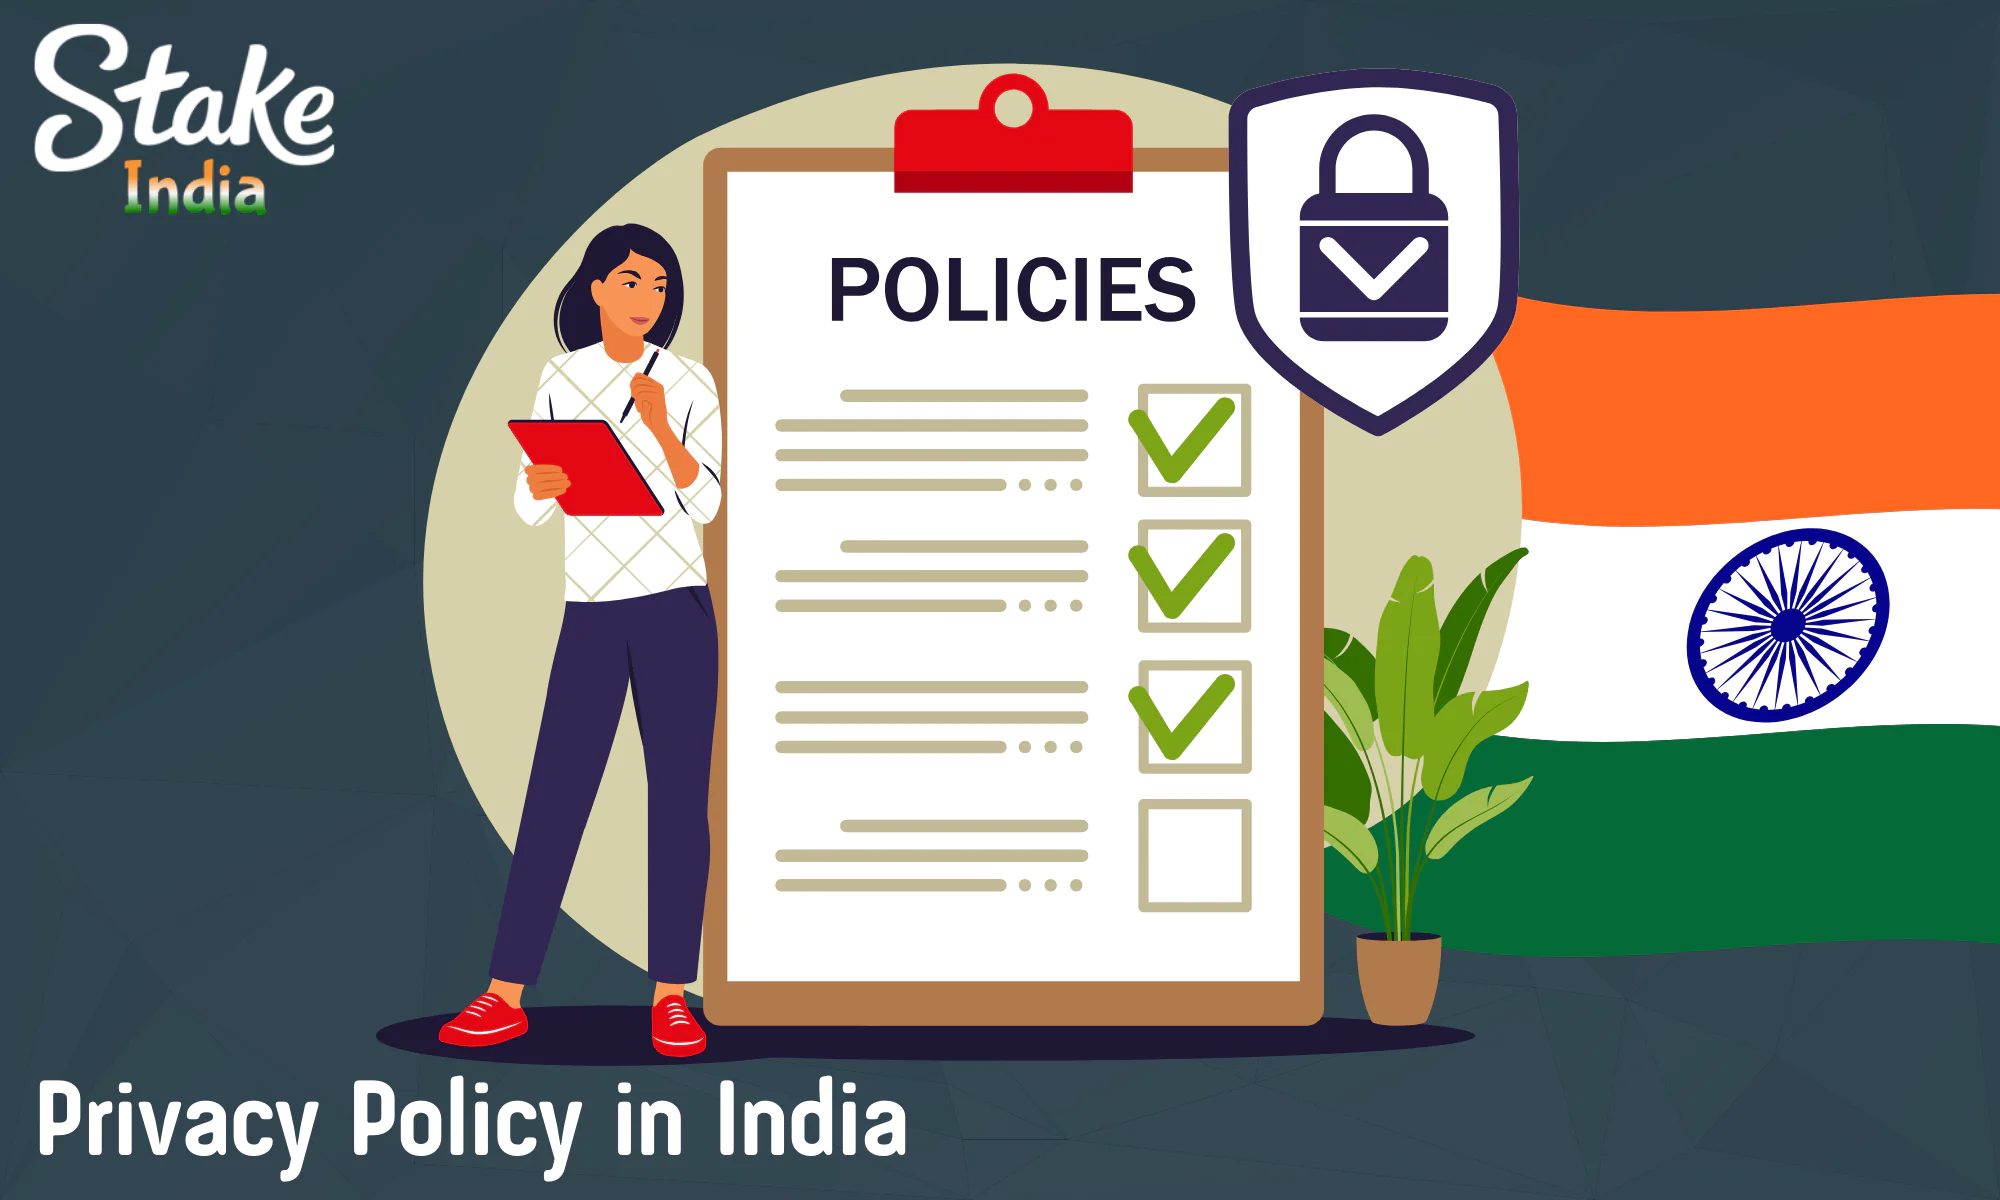 Stake has a privacy policy specifically designed for India